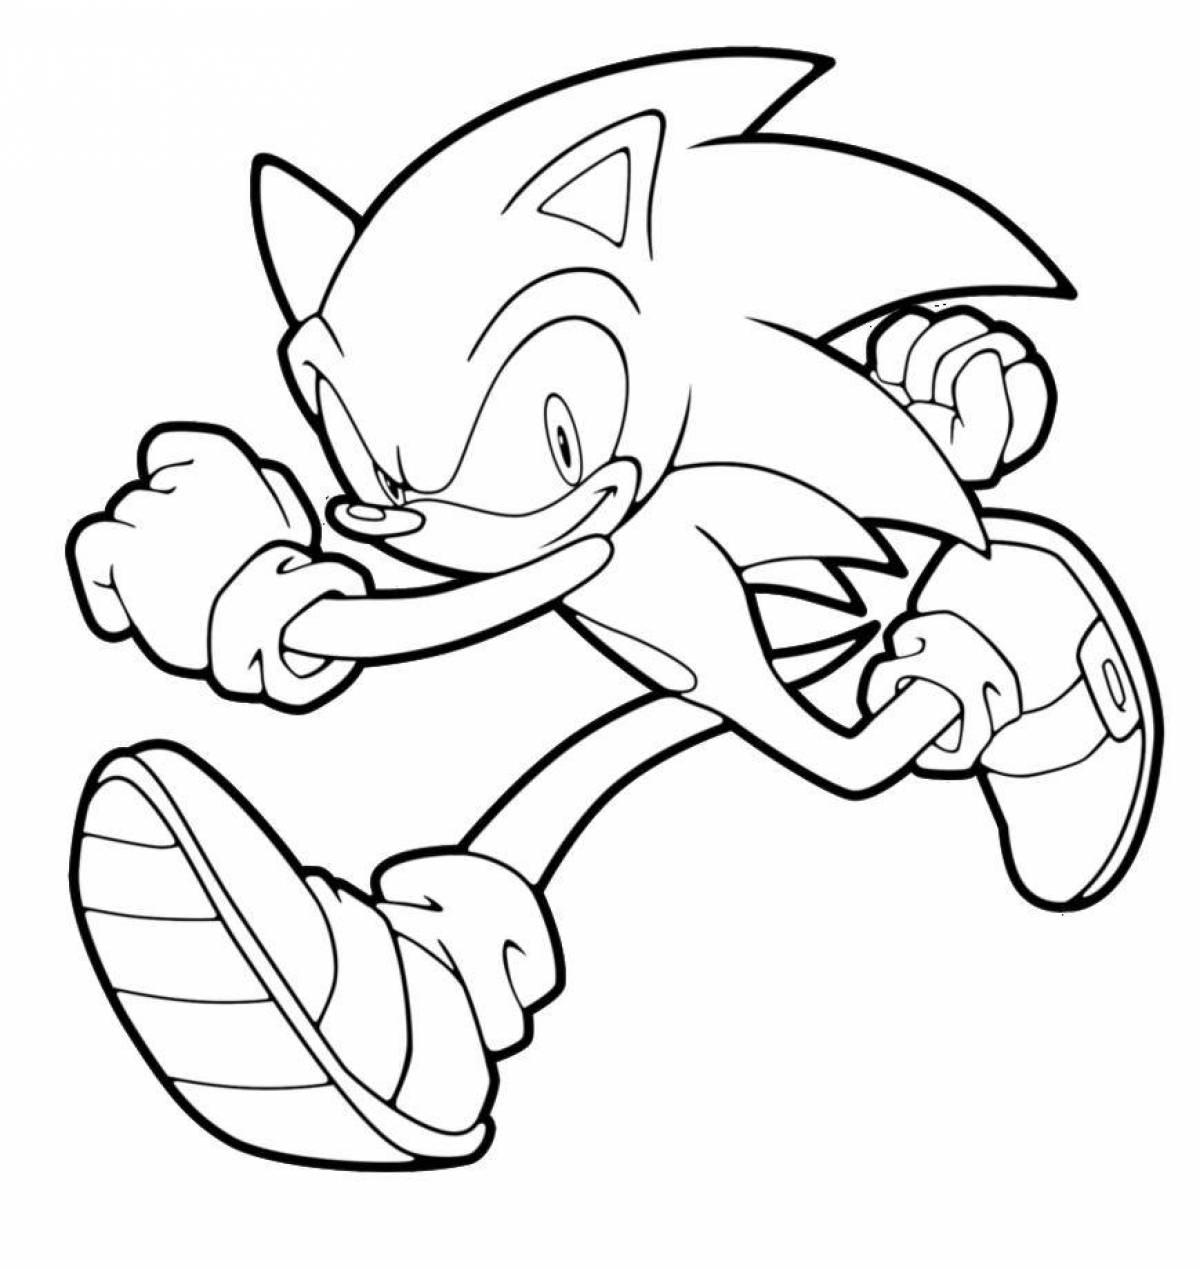 Fascinating sonic force coloring book